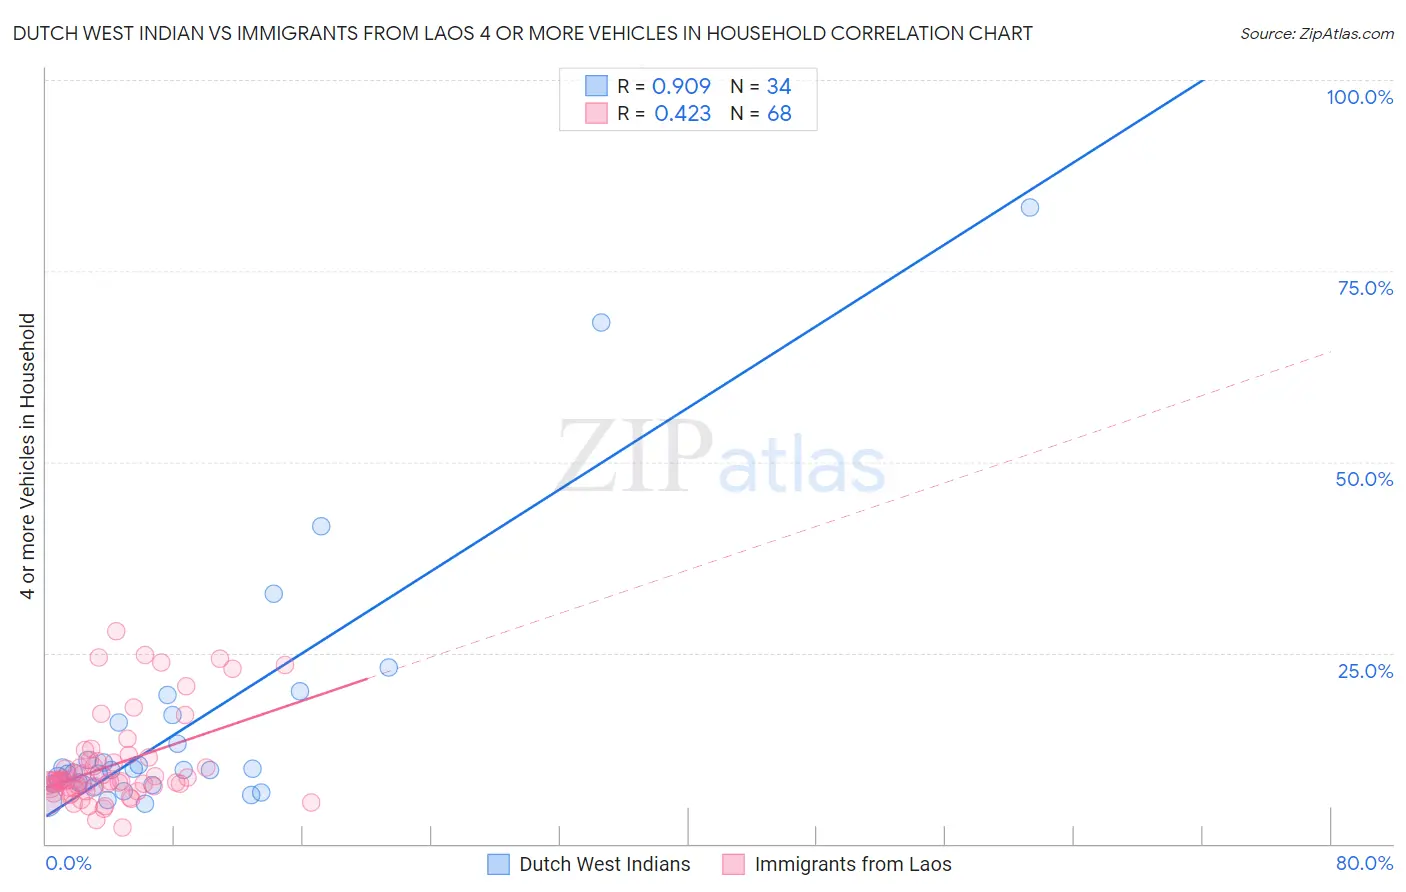 Dutch West Indian vs Immigrants from Laos 4 or more Vehicles in Household